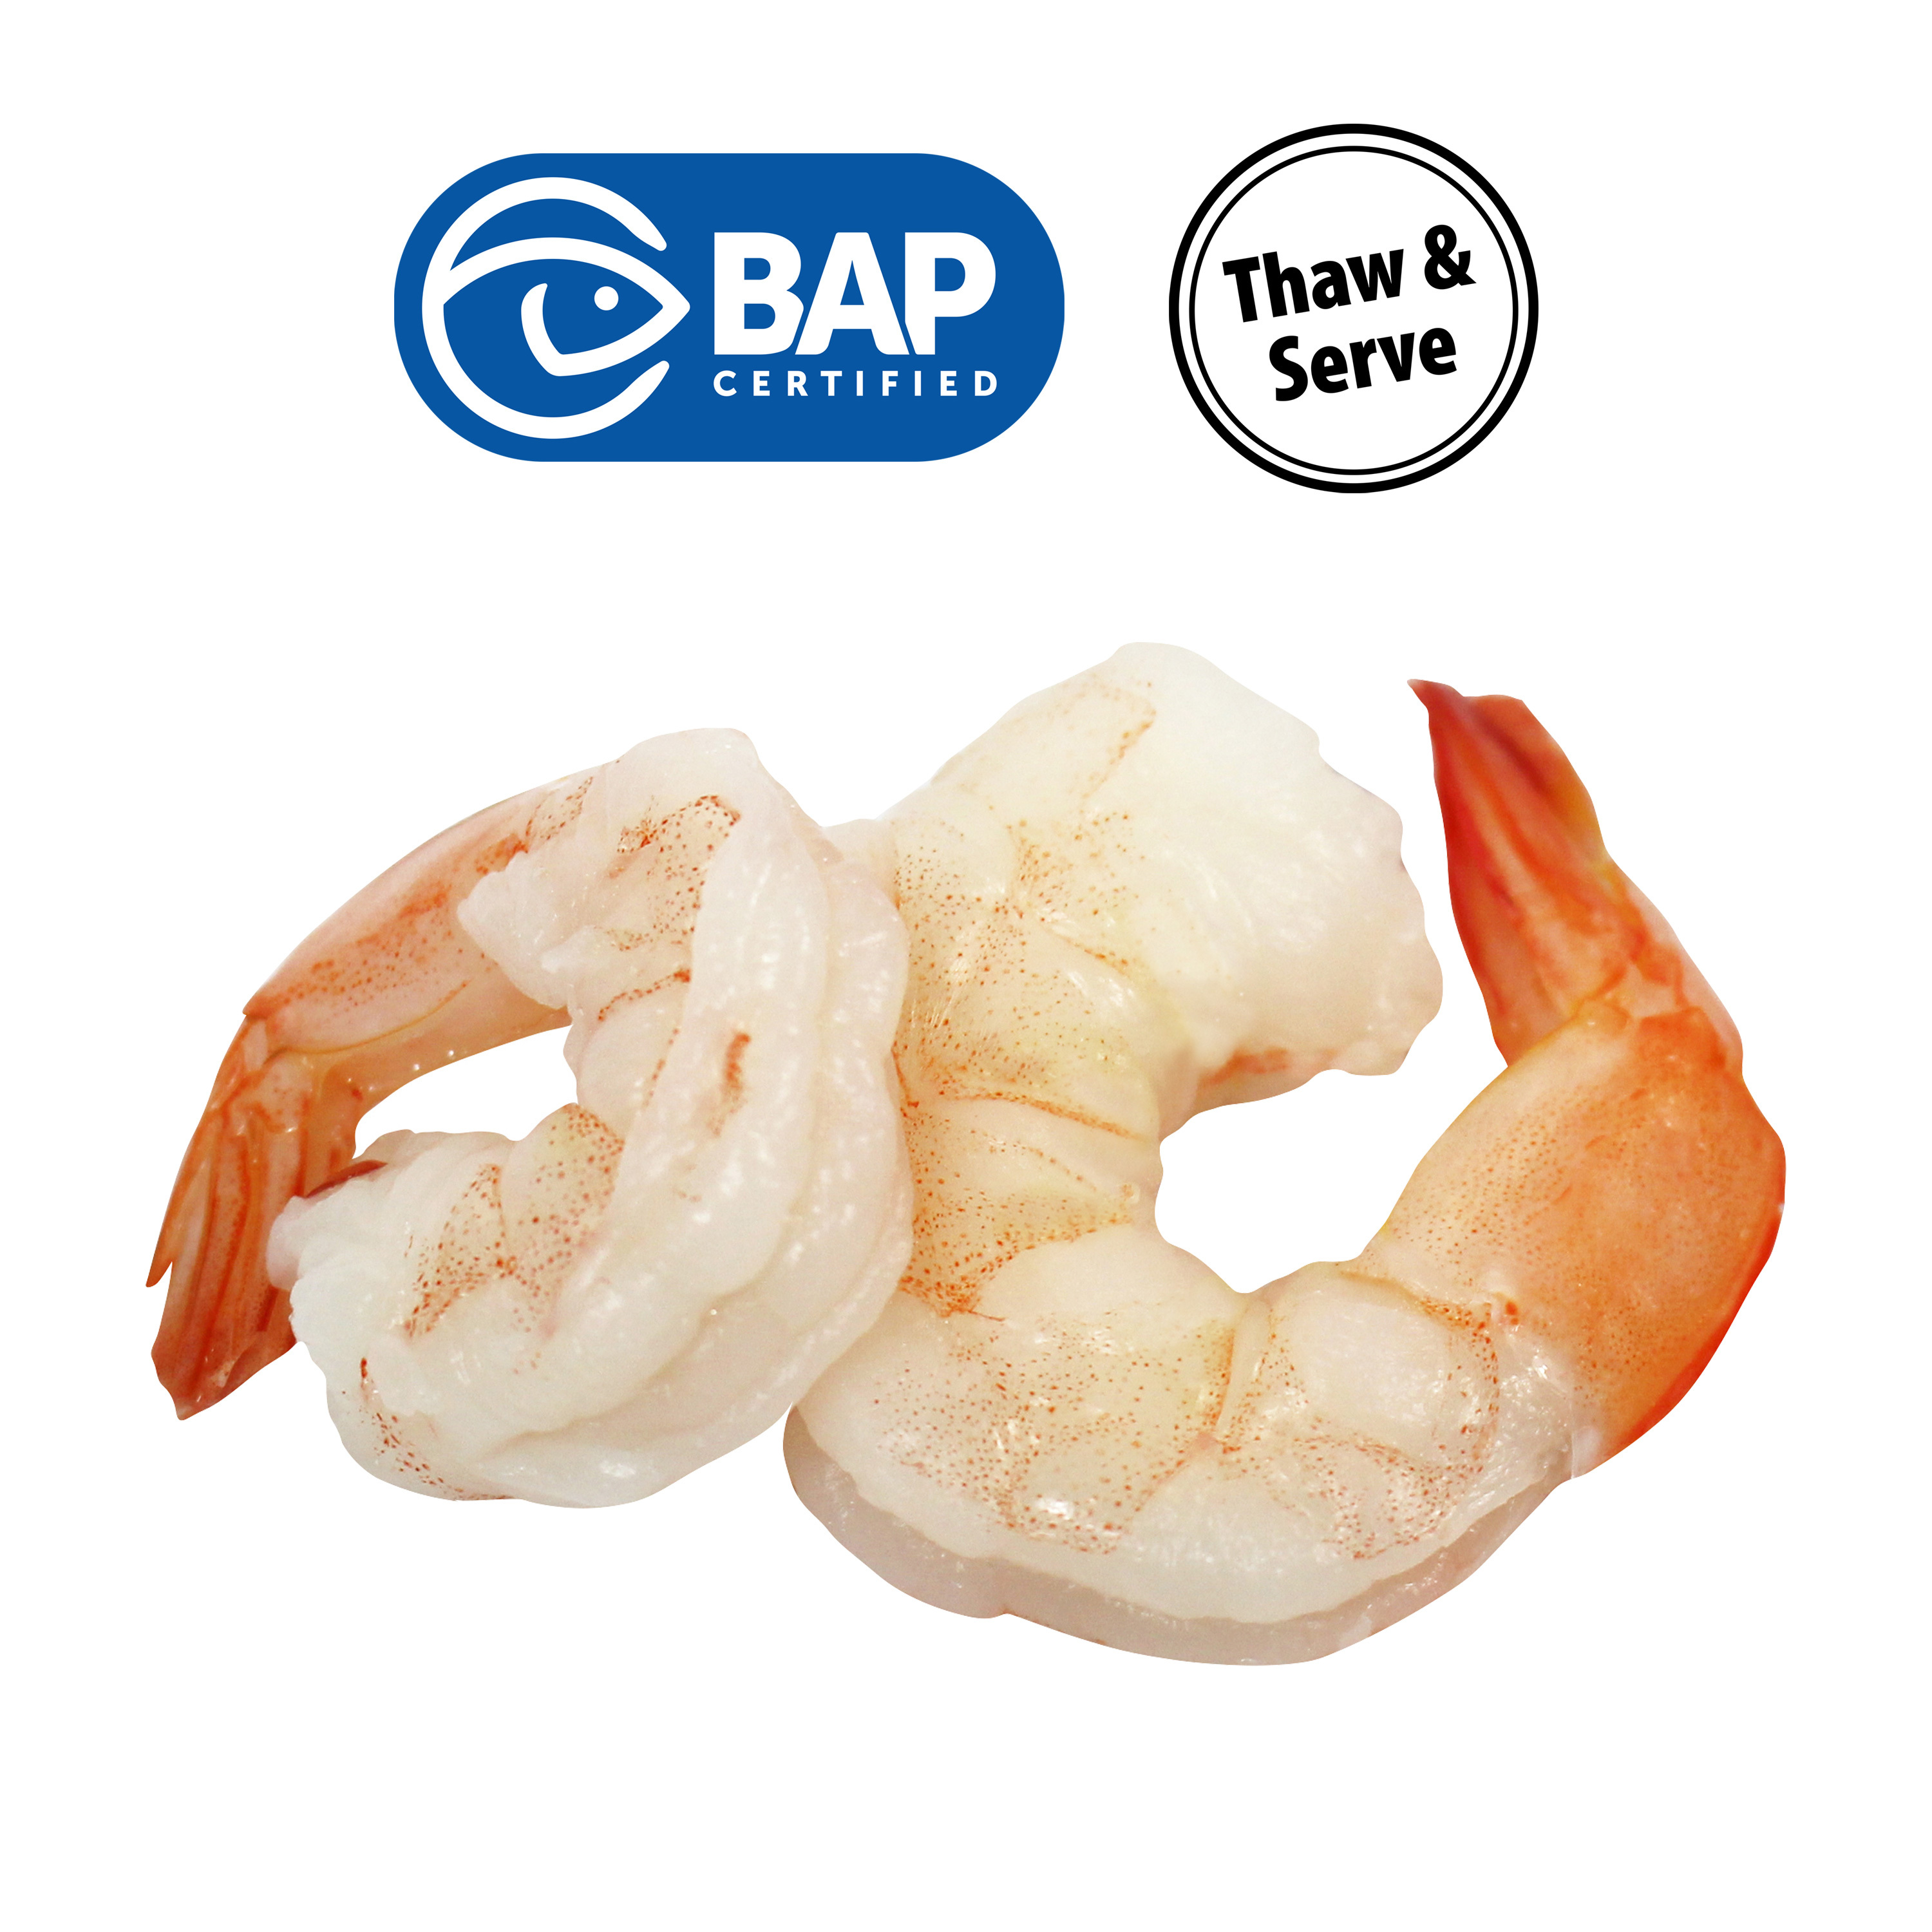 Great Value Frozen Cooked Medium Peeled Deveined Tail-On Shrimp, 24 oz Bag (41-60 count per lb) - image 2 of 10